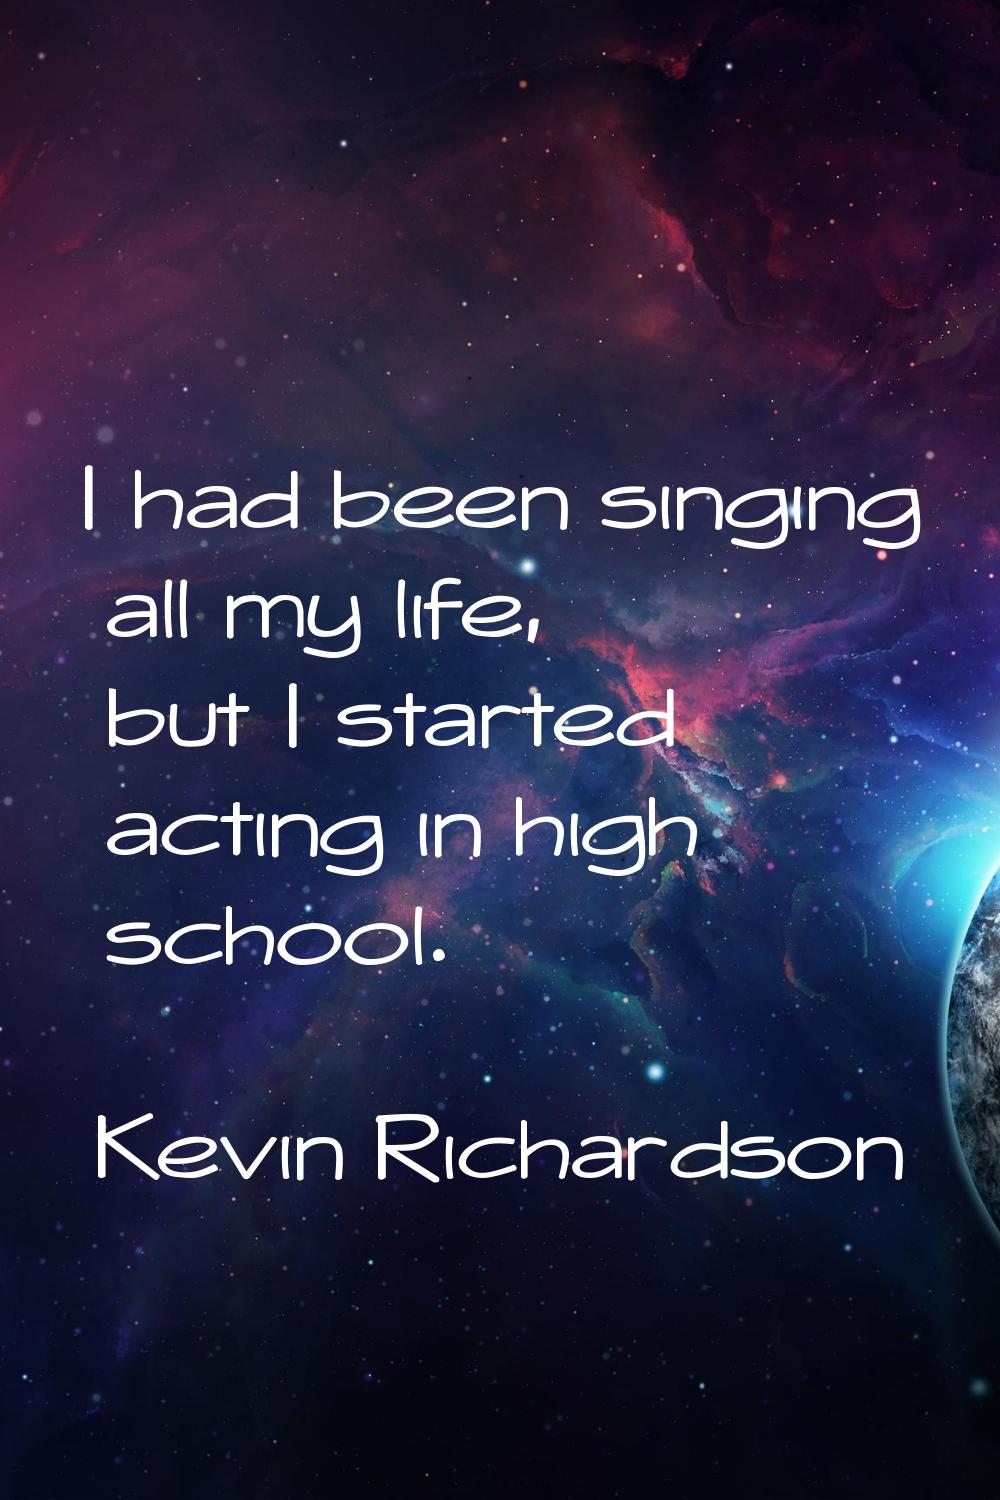 I had been singing all my life, but I started acting in high school.